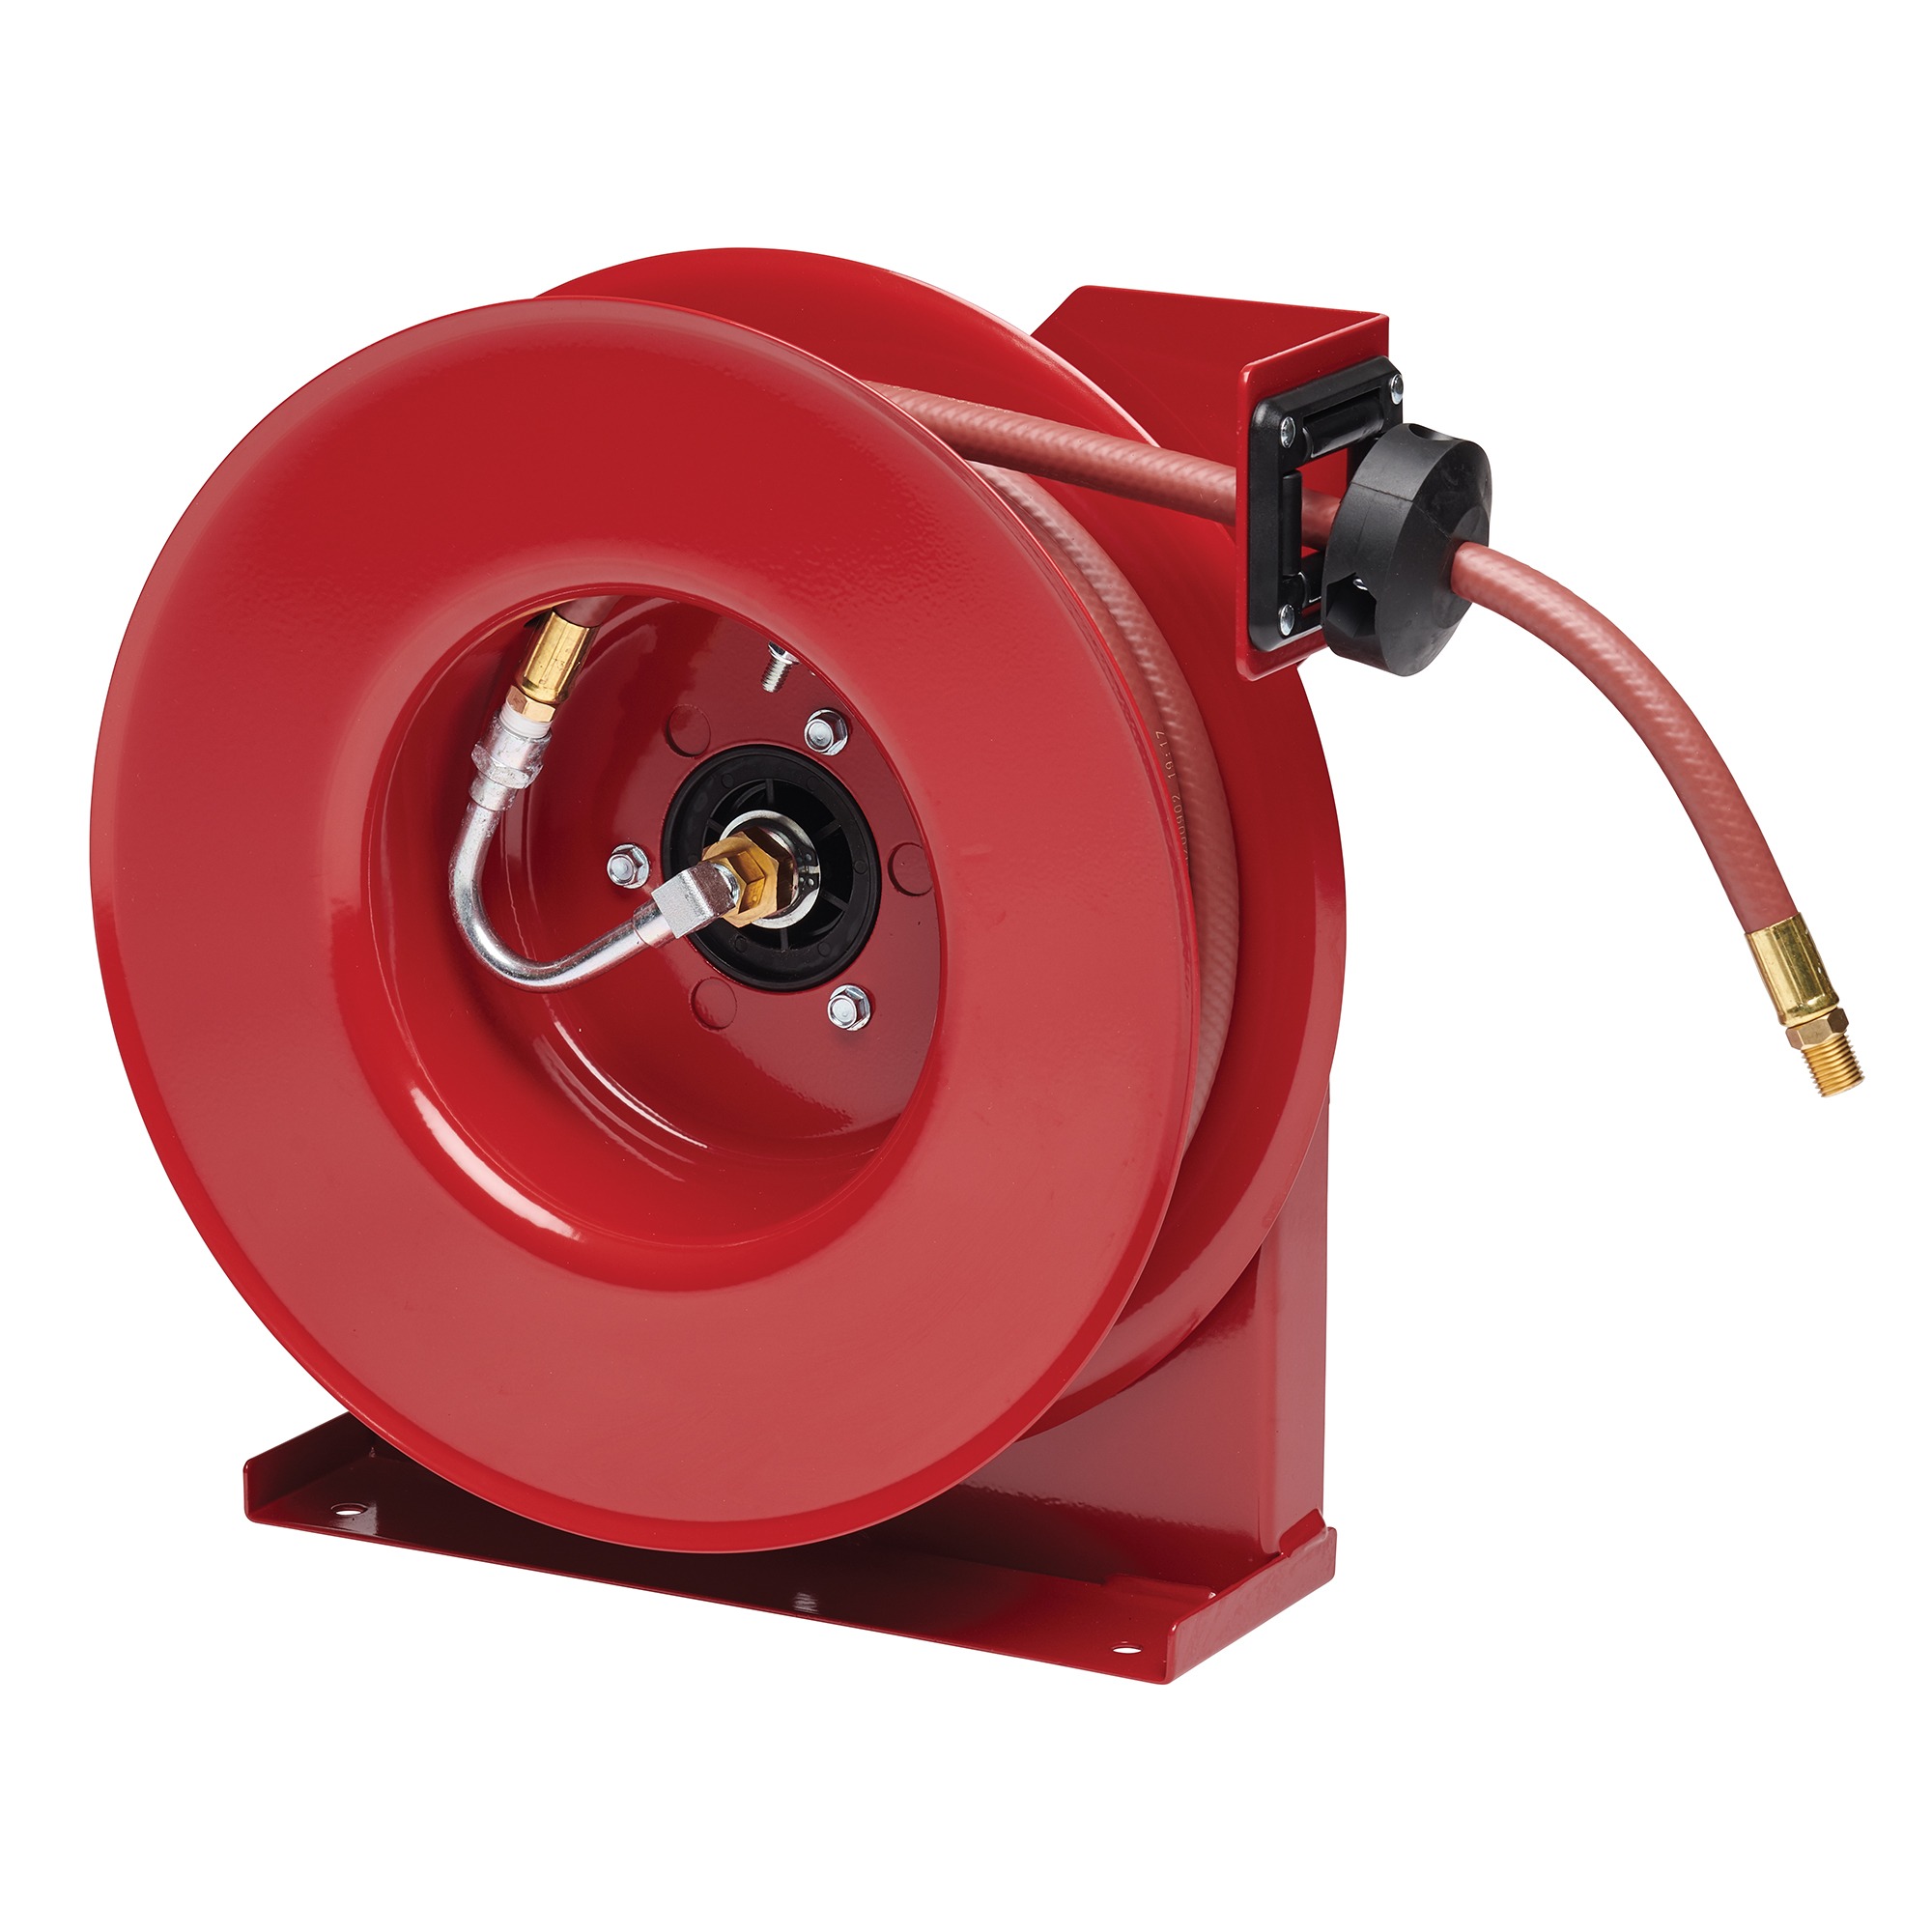 REELCRAFT 4435 OLP 1/4 x 55 ft Hose Reel Industrial Air & water, 300 PSI,  USA 699567000129